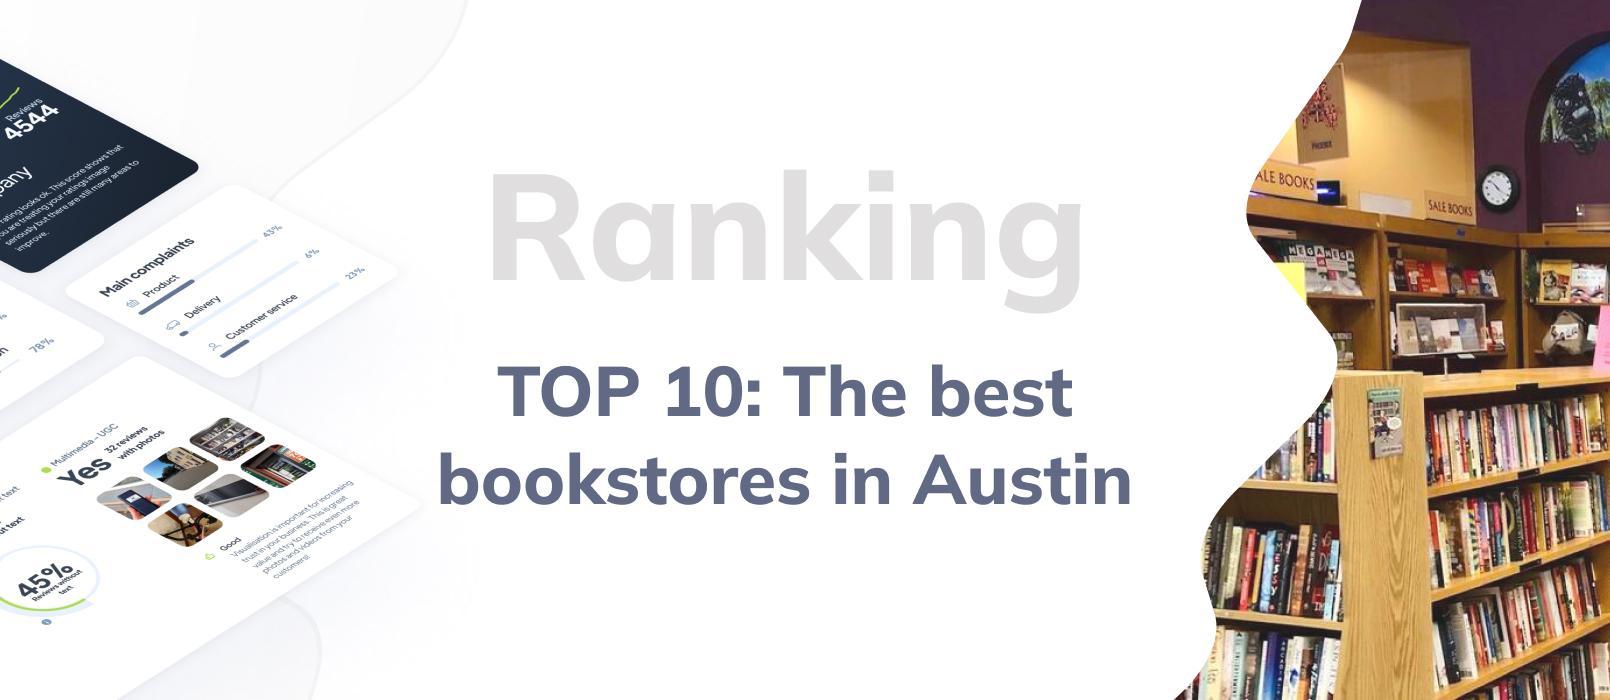 Bookstores in Austin - TOP 10 ranking